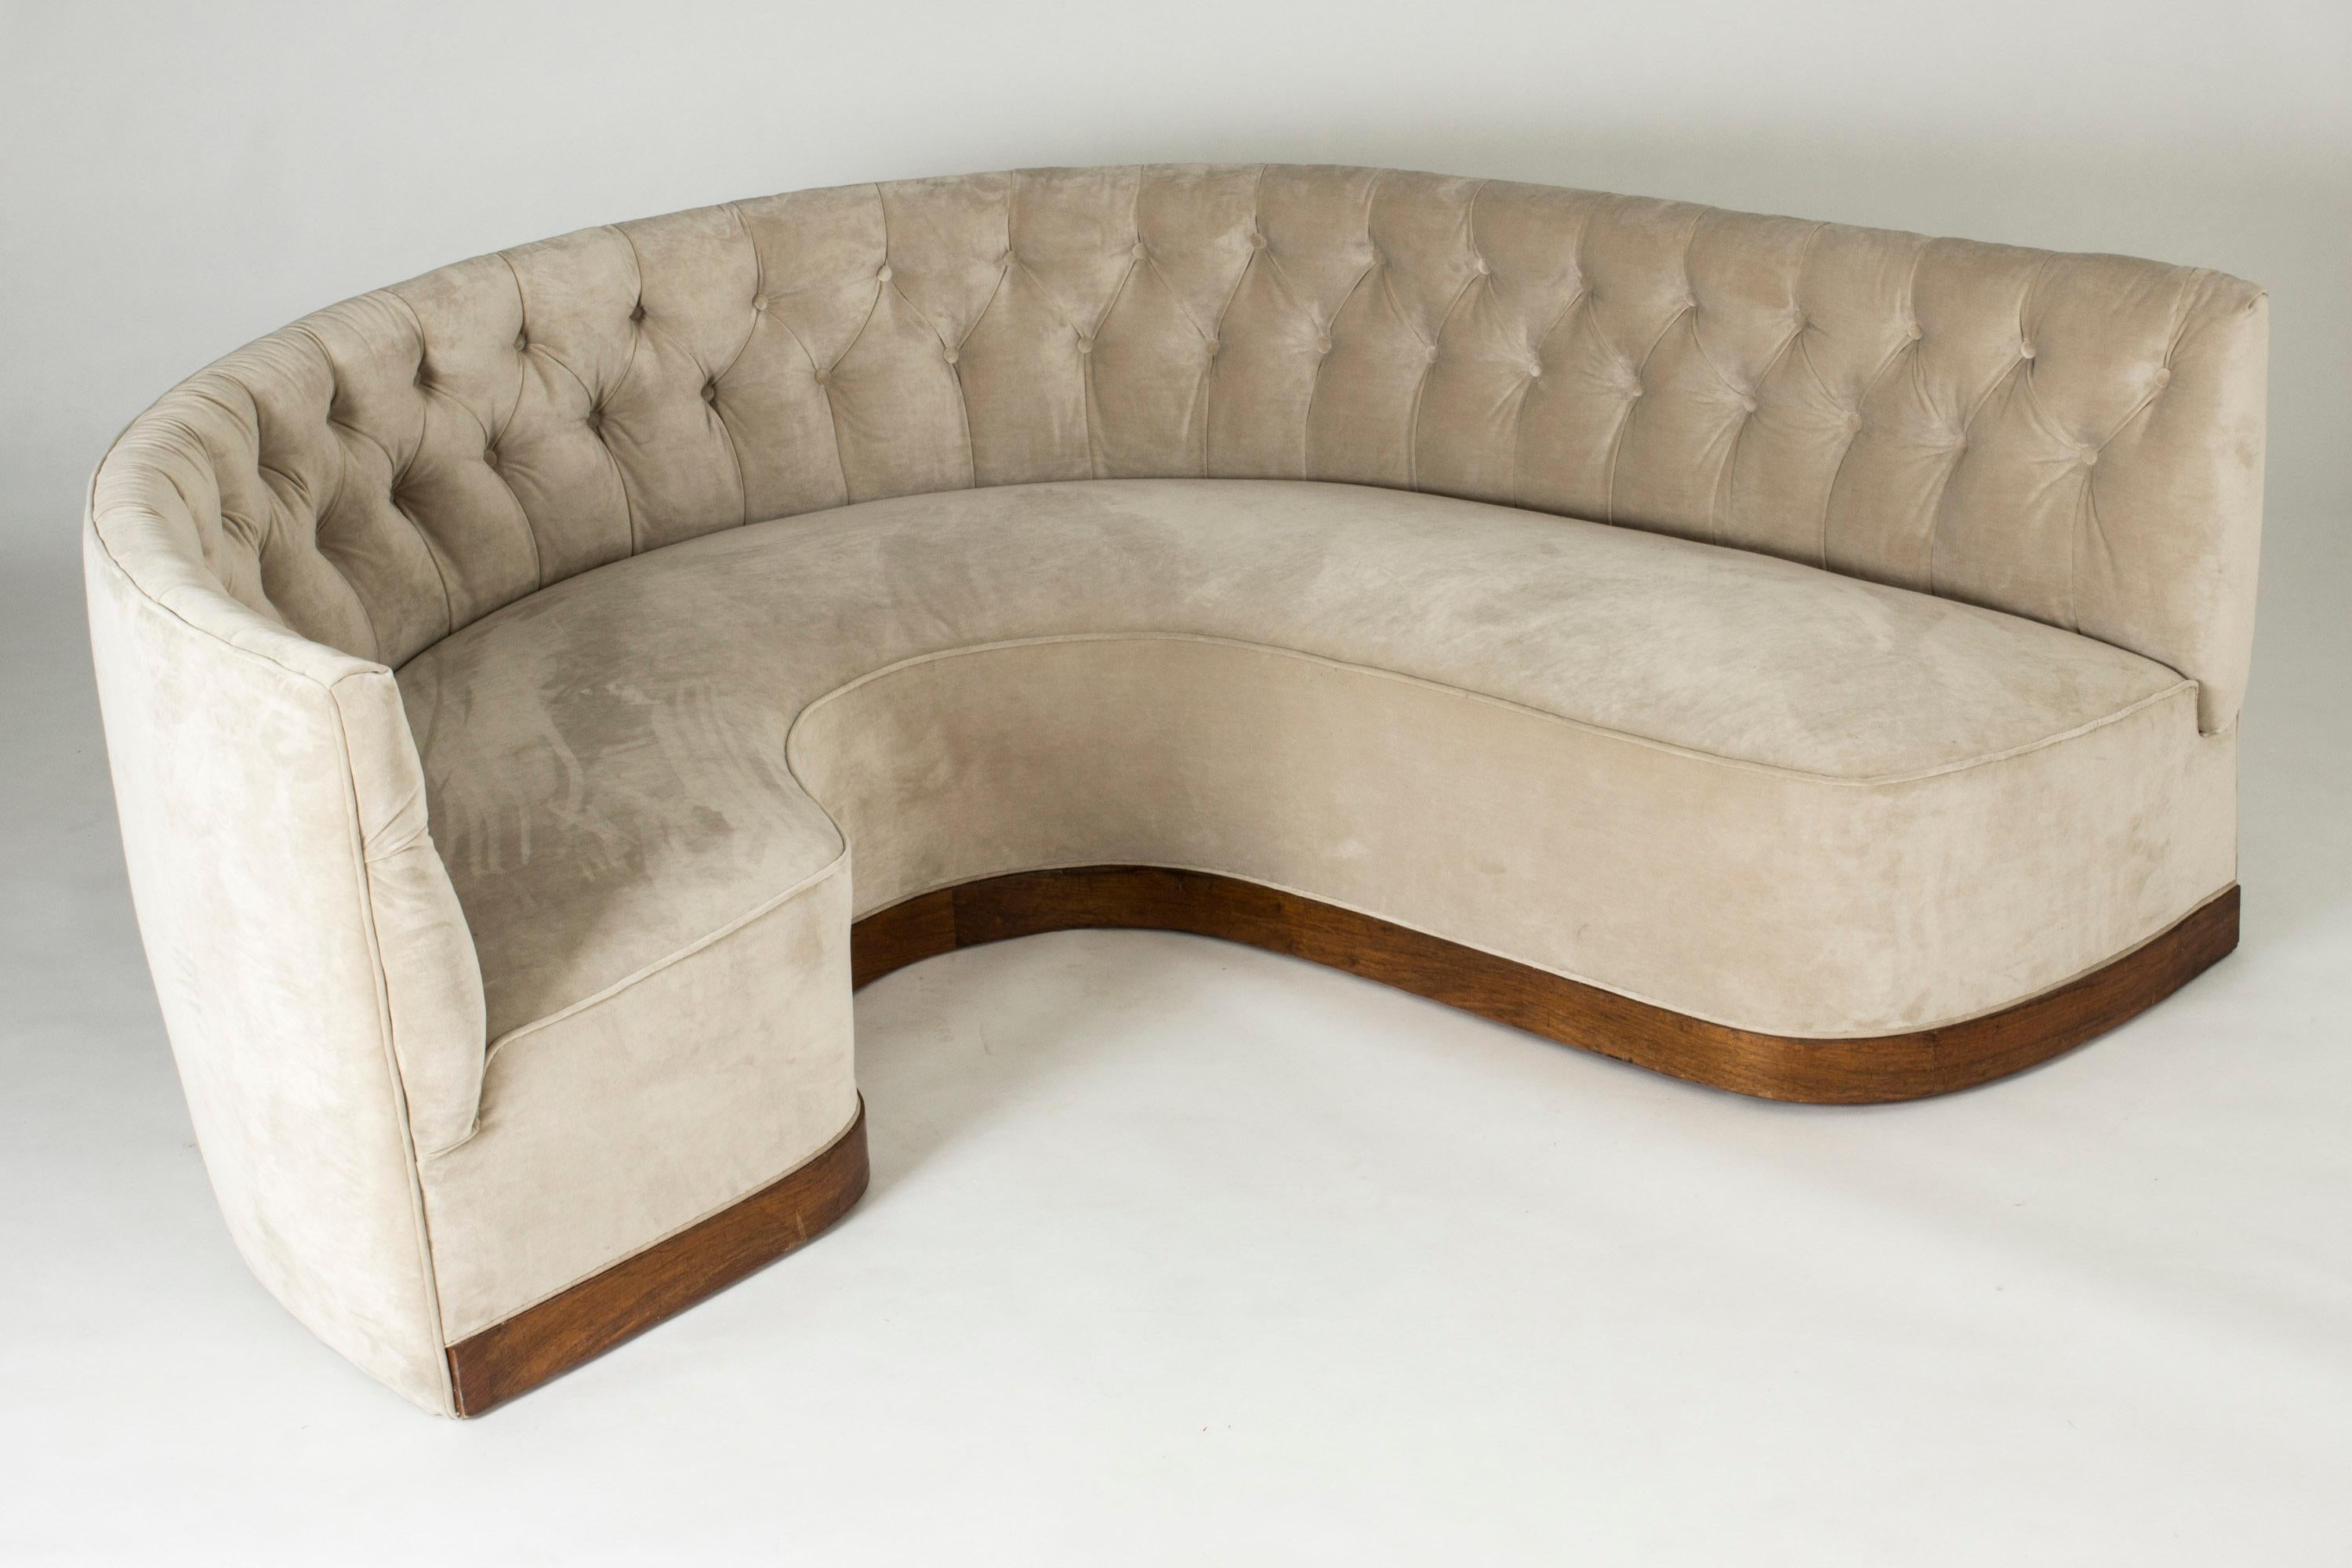 Swedish Modern Oversized Sofa, Sweden, 1930s In Good Condition For Sale In Stockholm, SE